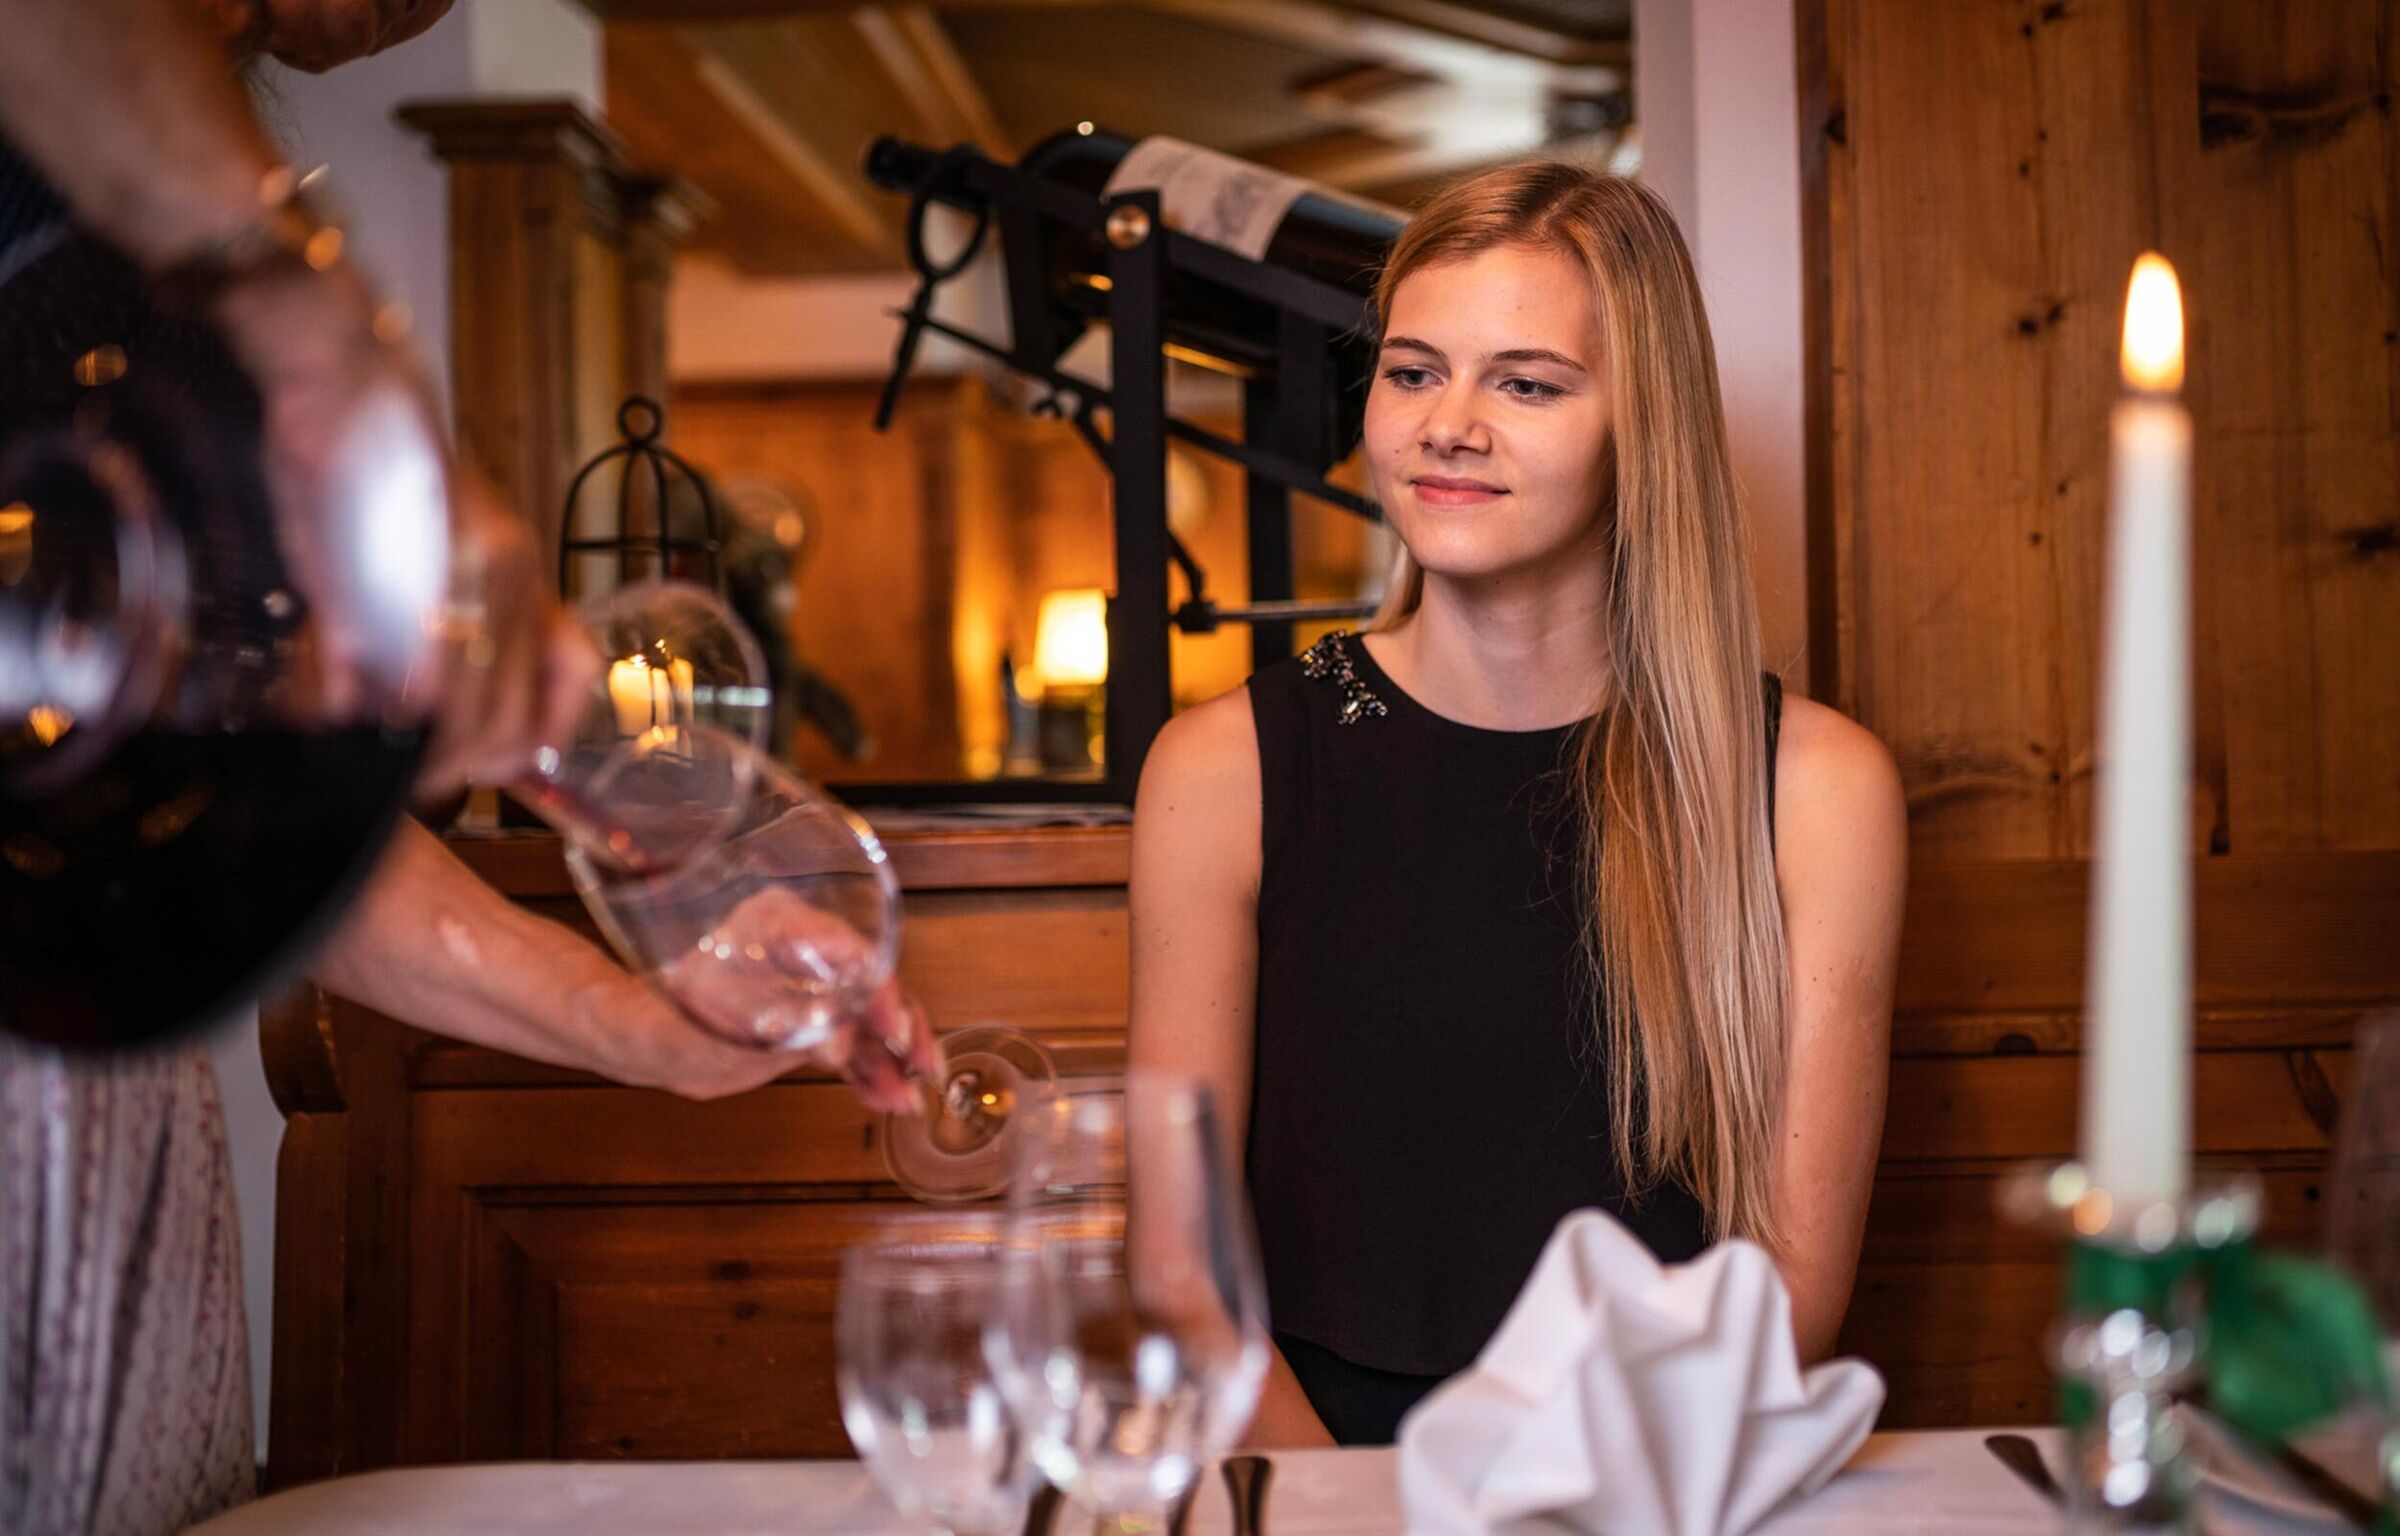 A woman is sitting in a rustic parlour and has just been poured a glass of wine by the waitress.